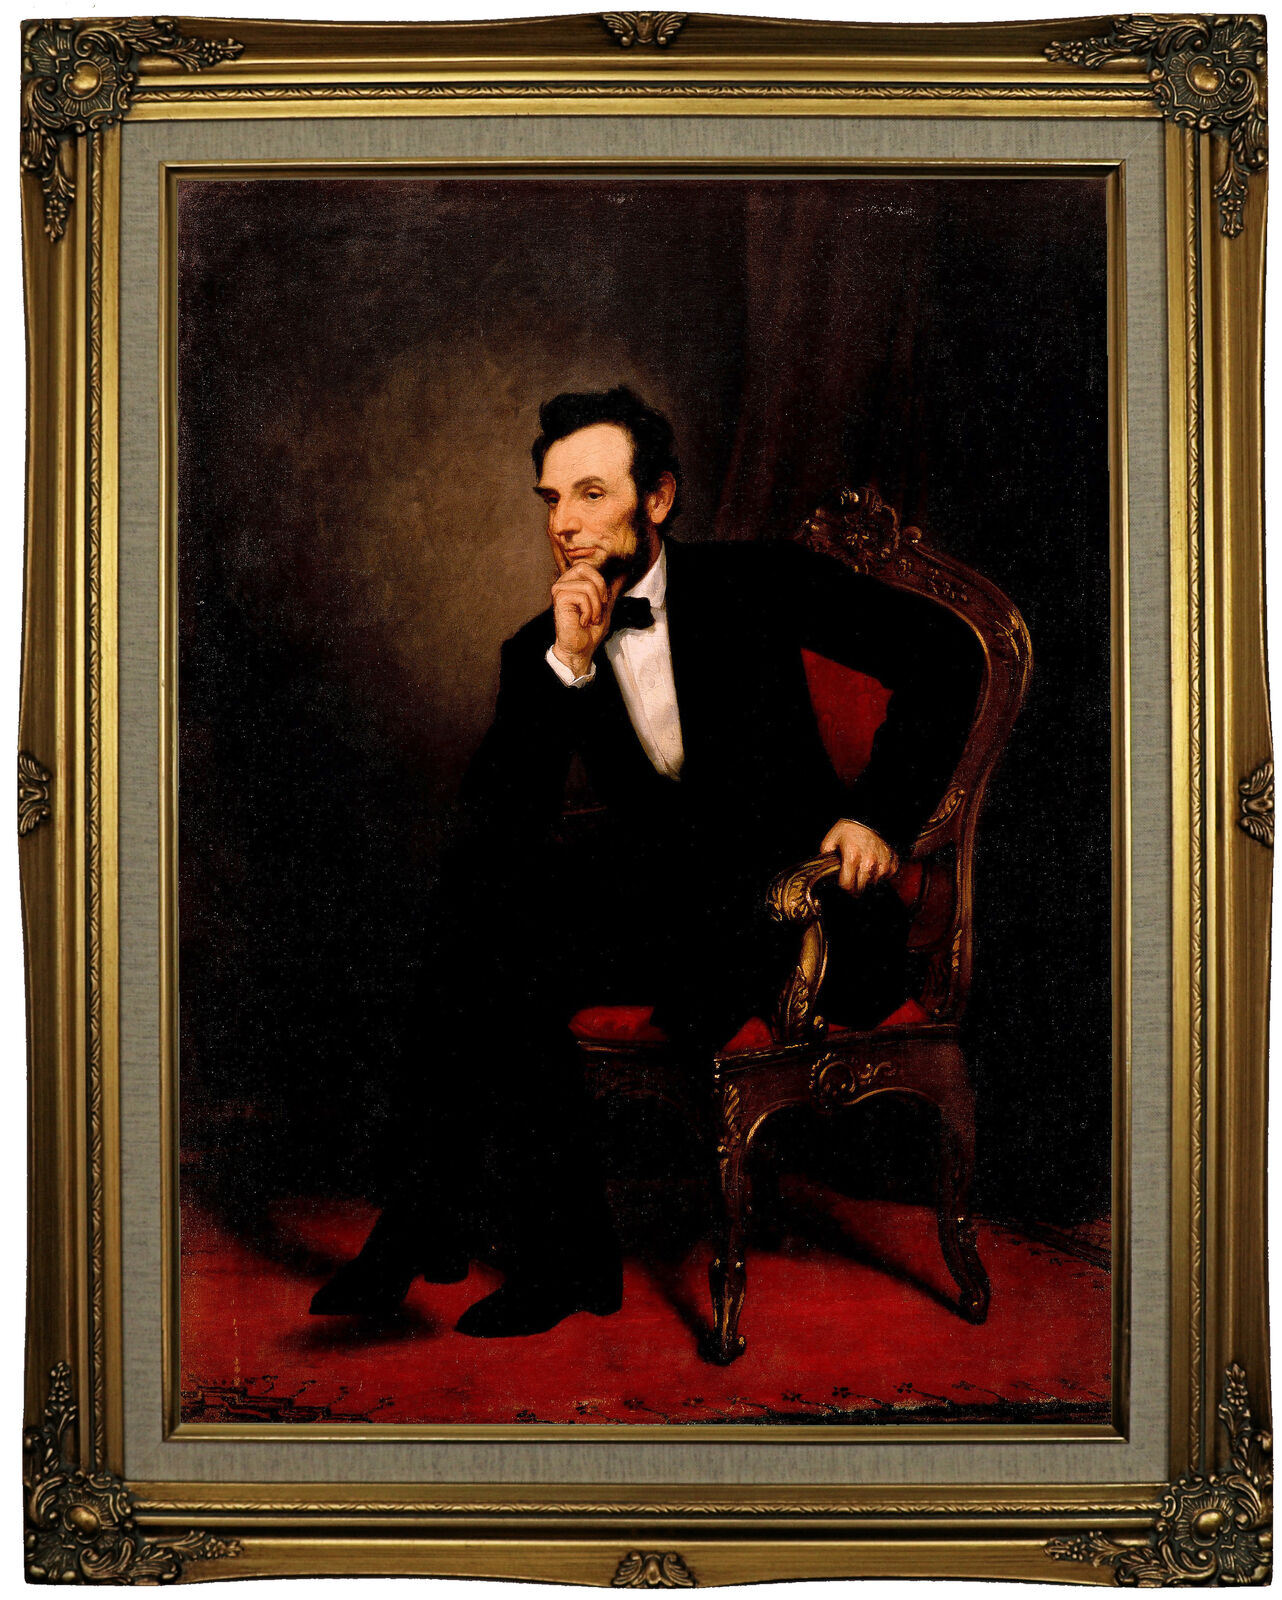 Healy Portrait of Abraham Lincoln 1869 Wood Framed Canvas Print Repro 18x24